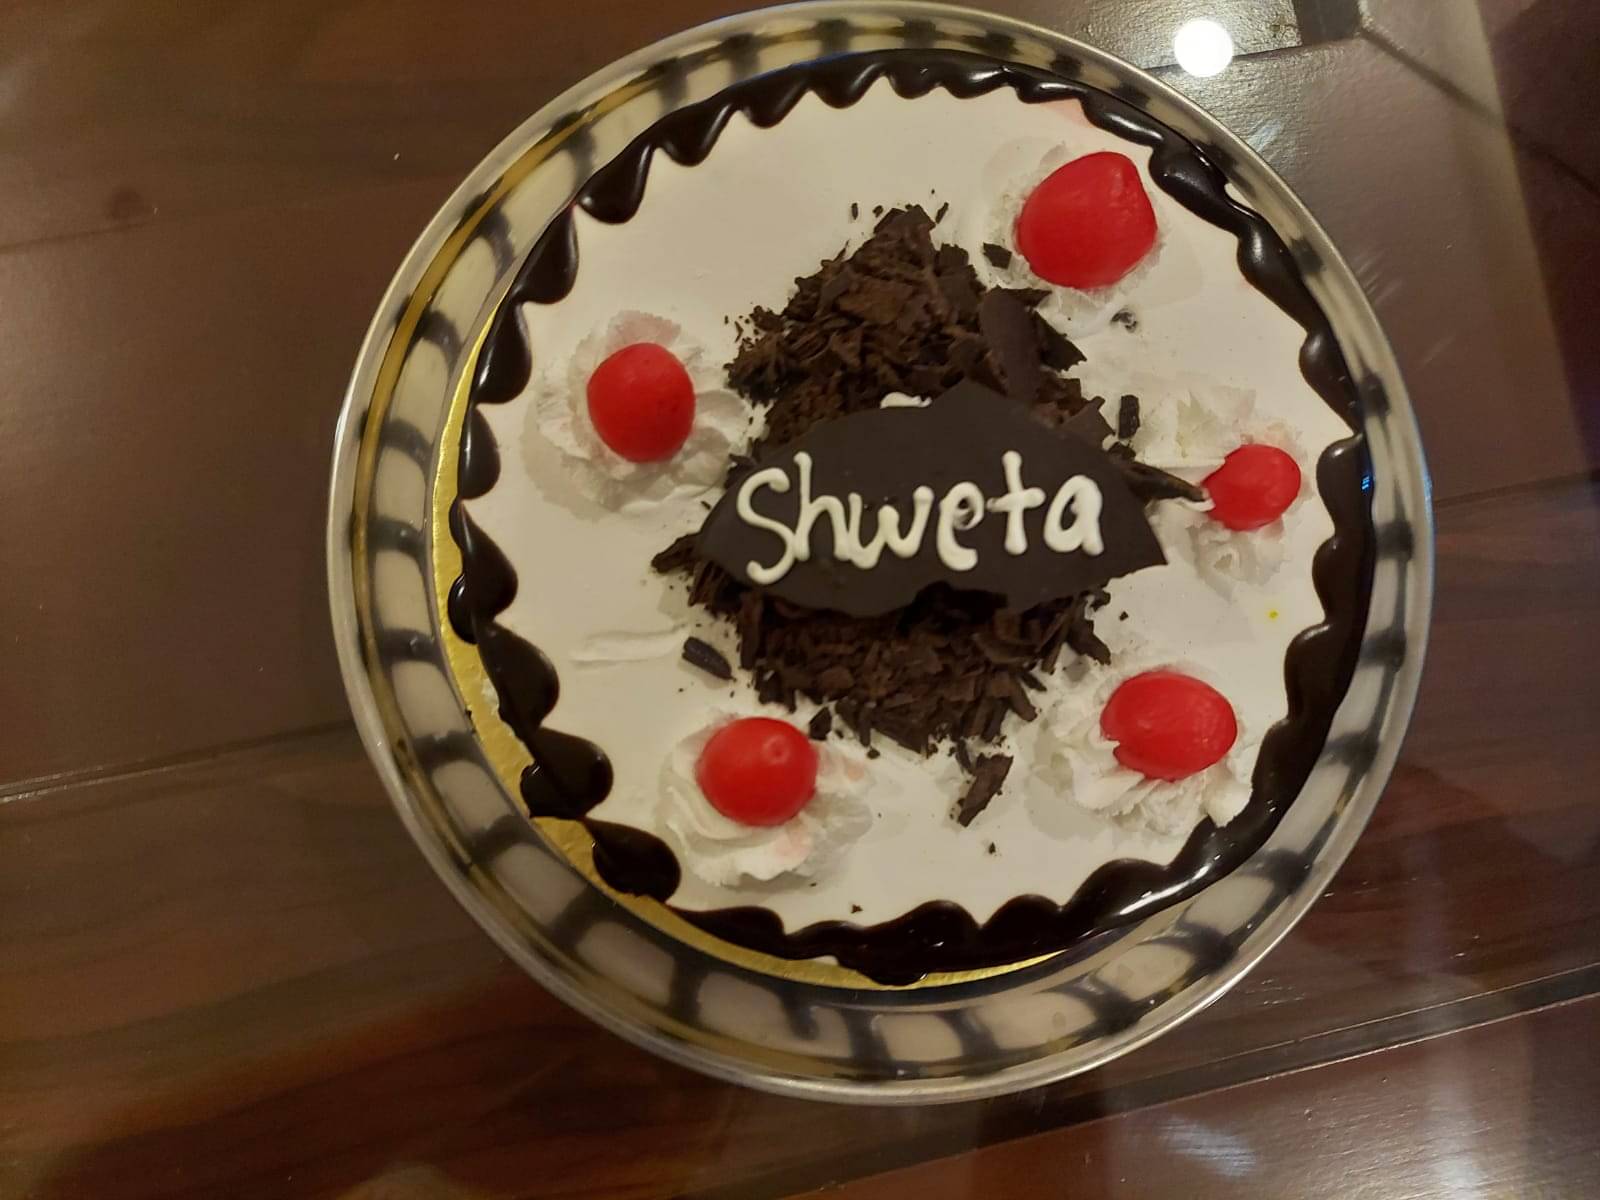 50+ Best Birthday 🎂 Images for Shweta Instant Download